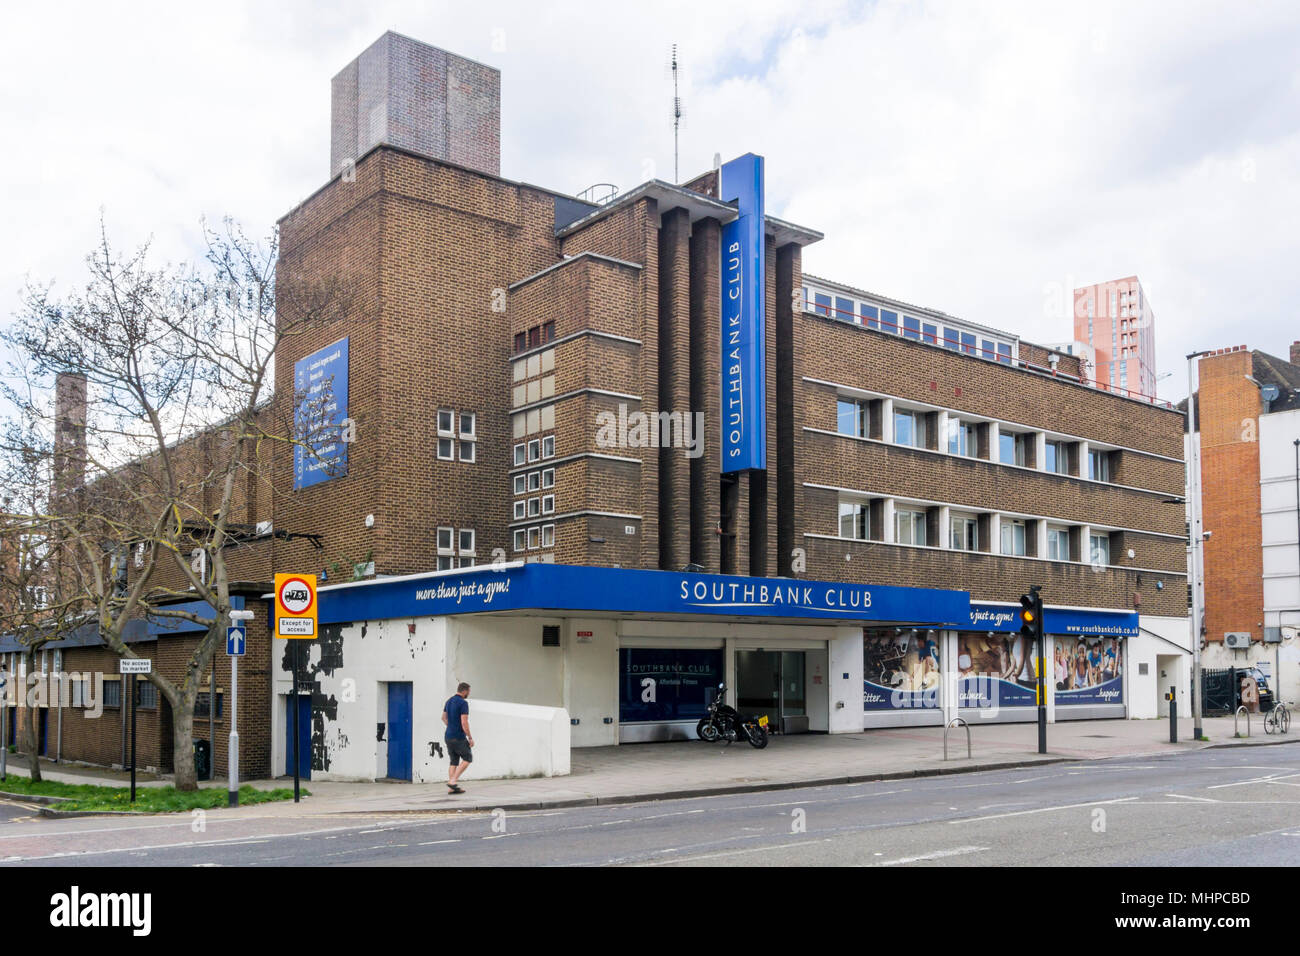 The Southbank Club, a fitness club on Wandsworth Road in South London. Stock Photo